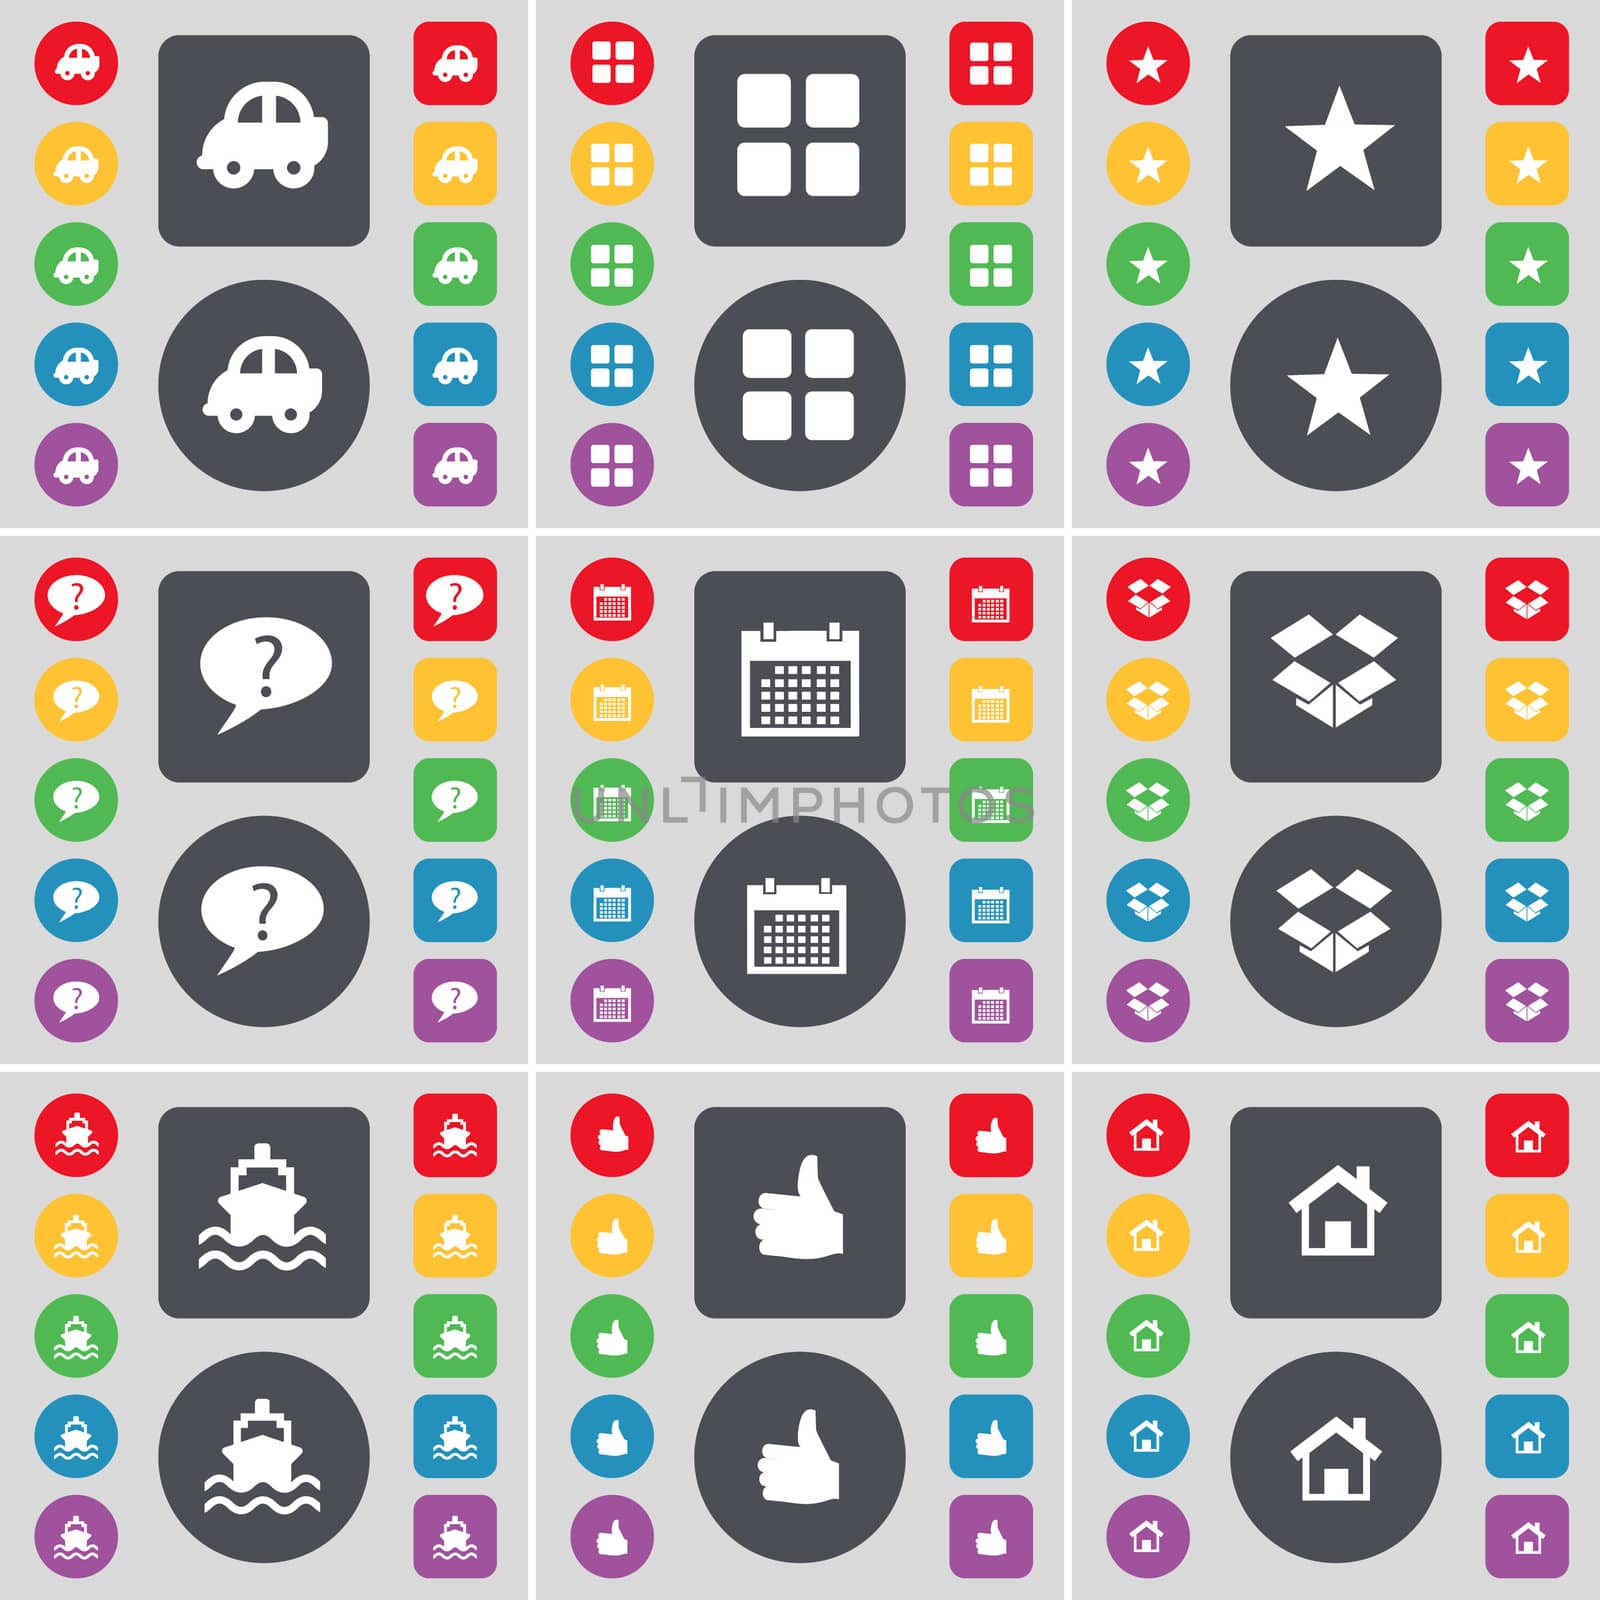 Car, Apps, Star, Chat bubble, Calendar, Dropbox, Ship, Like, House icon symbol. A large set of flat, colored buttons for your design.  by serhii_lohvyniuk